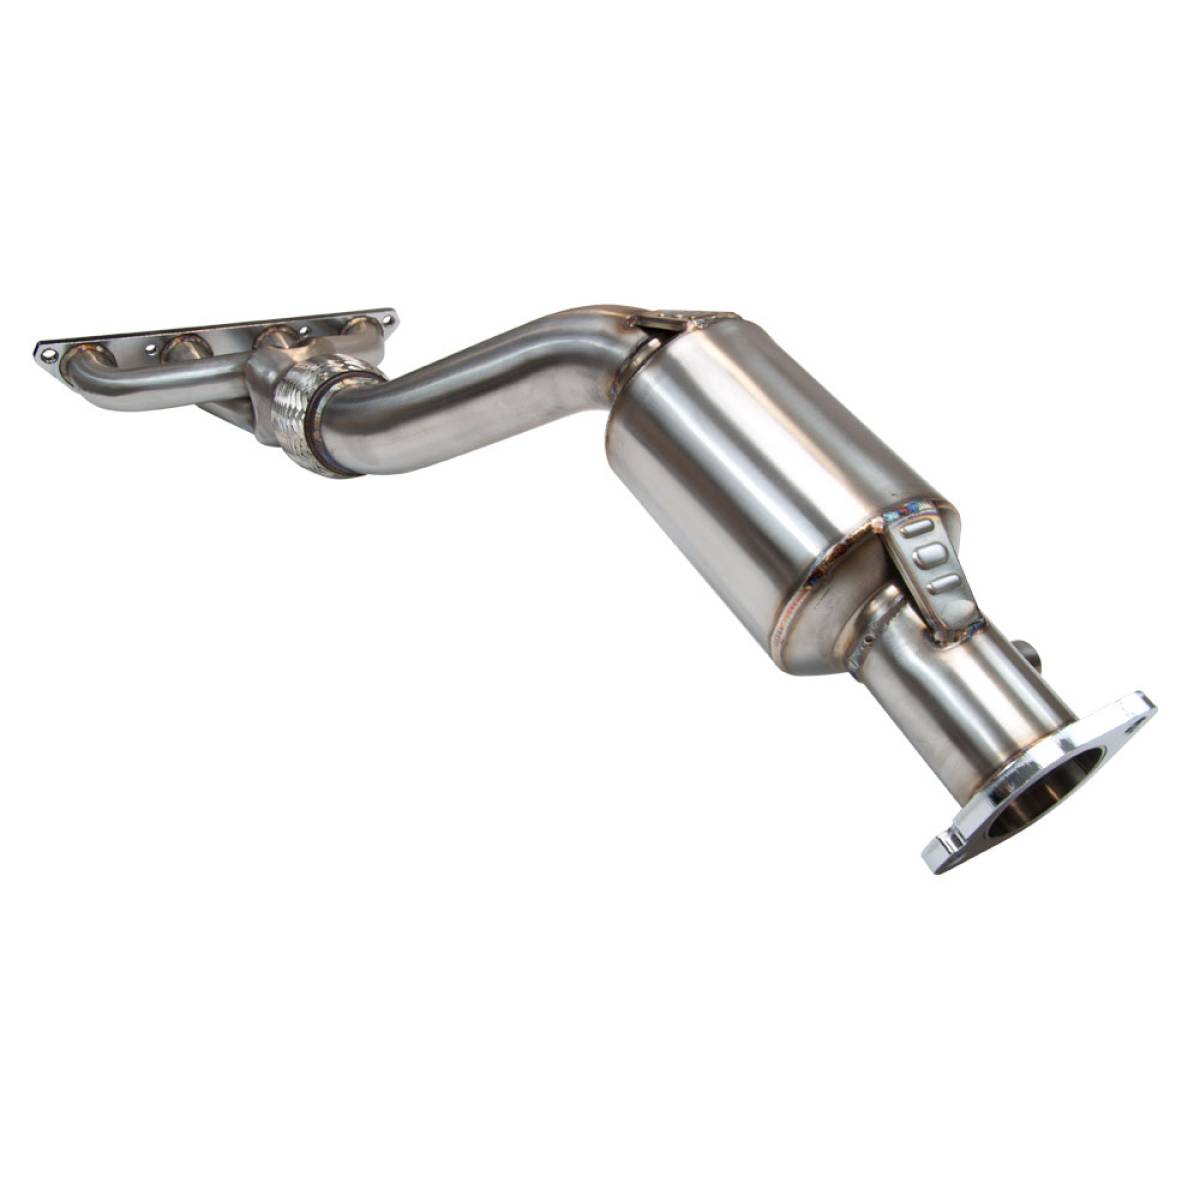 MINI COOPER S R50 & R53 1.6 SUPERCHARGED EXHAUST MANIFOLD WITH CATALYTIC CONVERTER-carbonizeduk